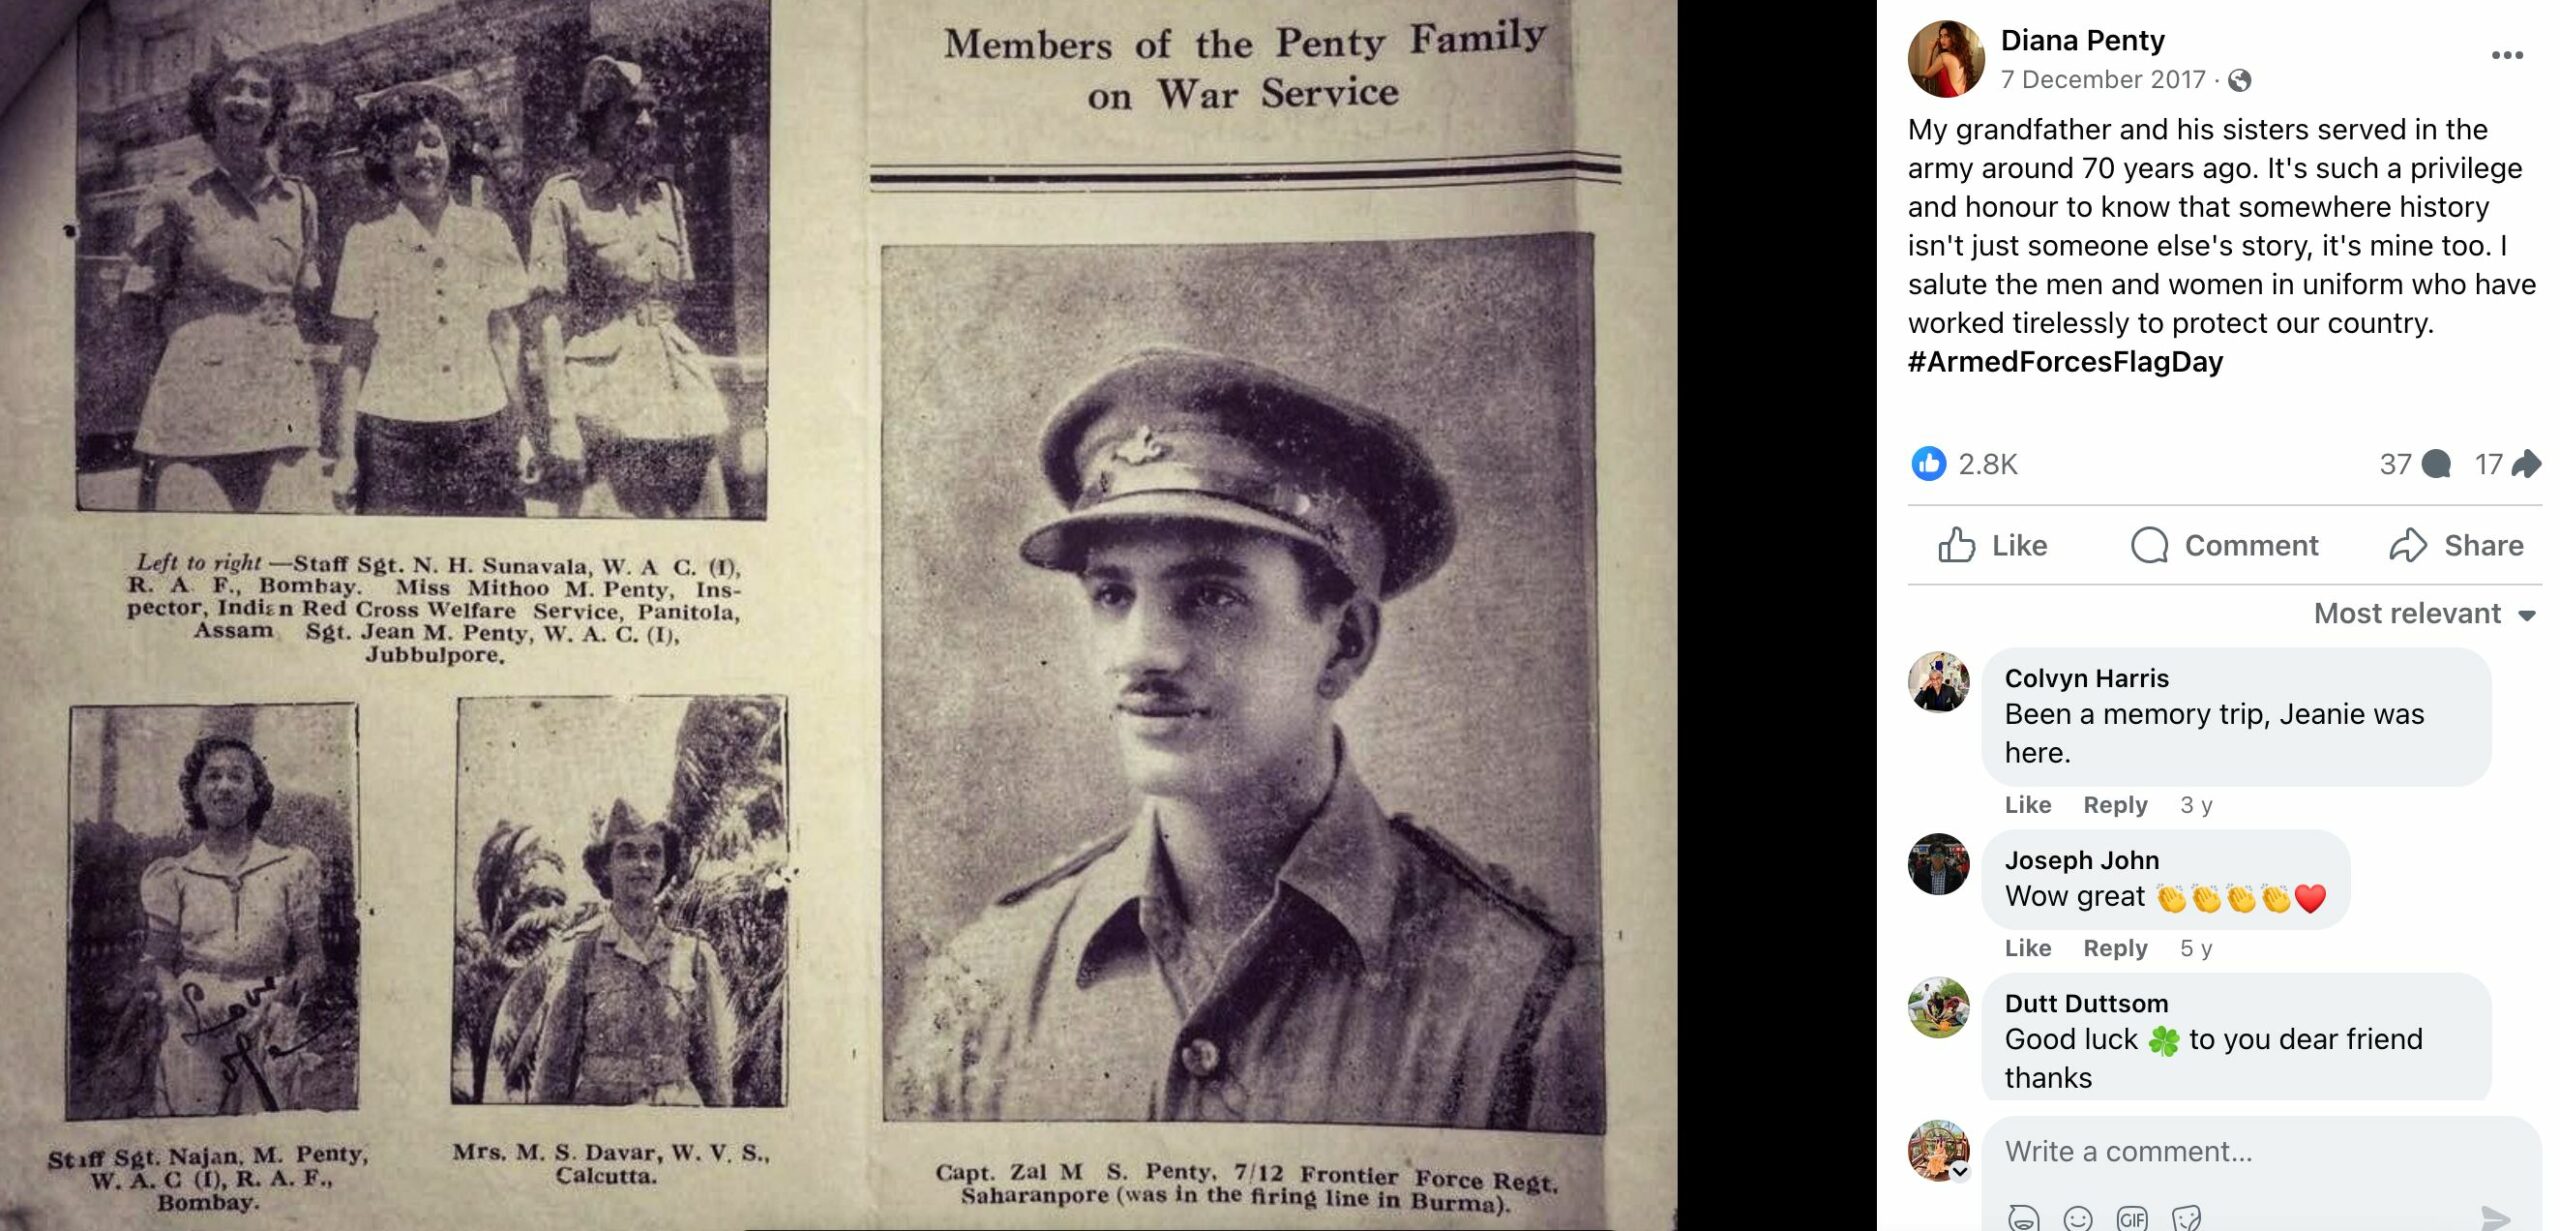 Diana Penty's Facebook post about her grandfather's contribution to the Indian Army